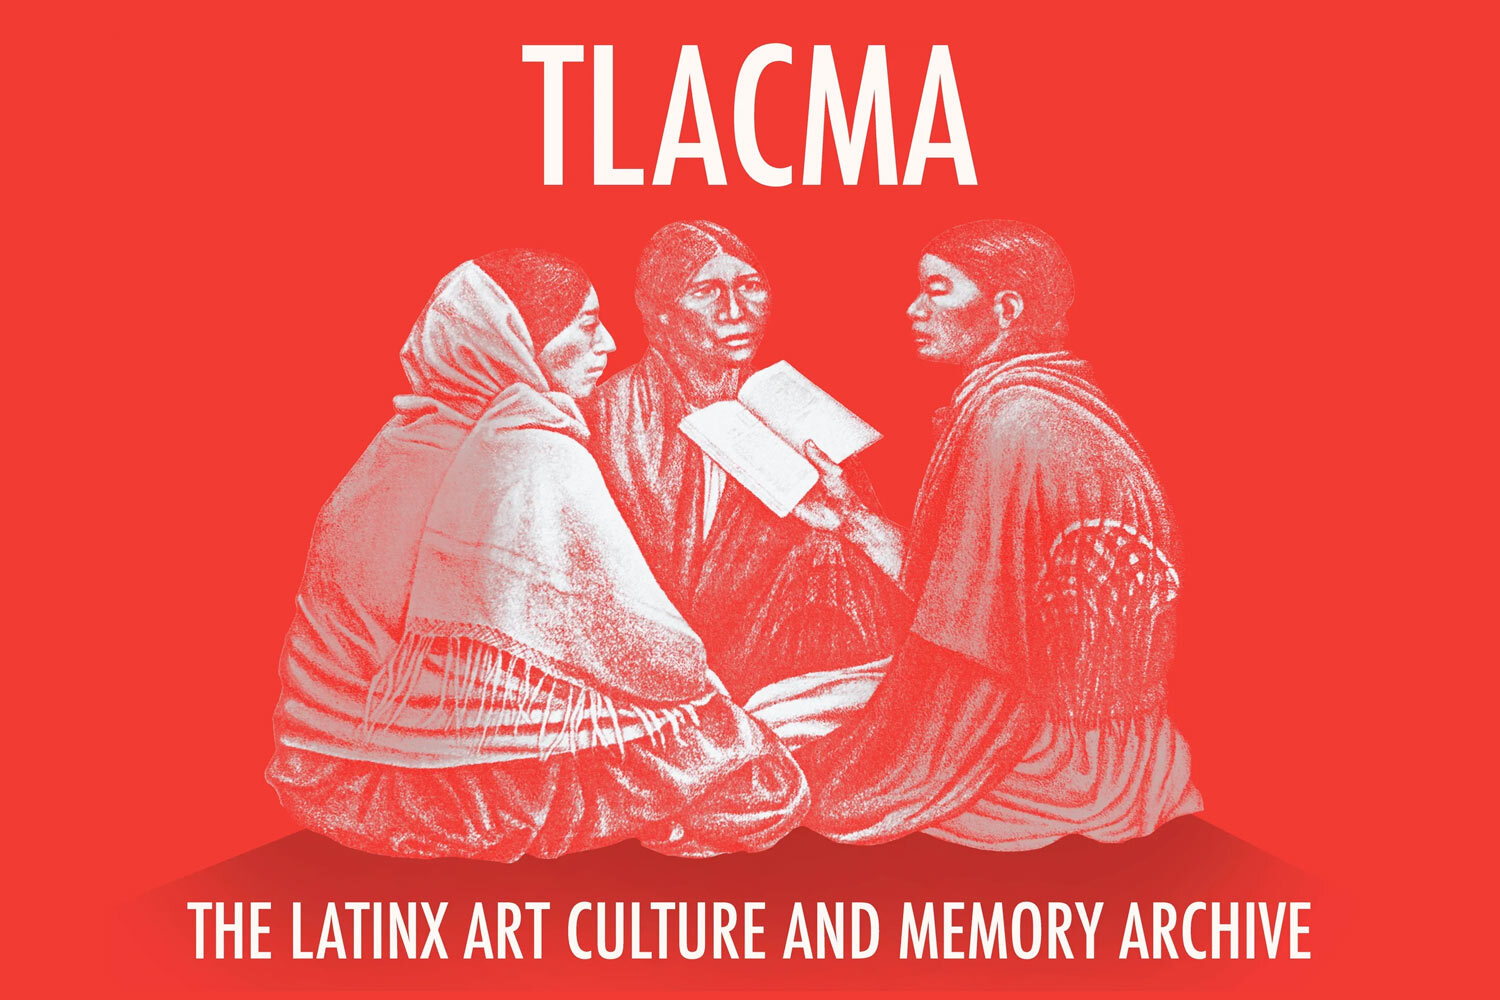 TLACMA - The Latinx Art Culture and Memory Archive